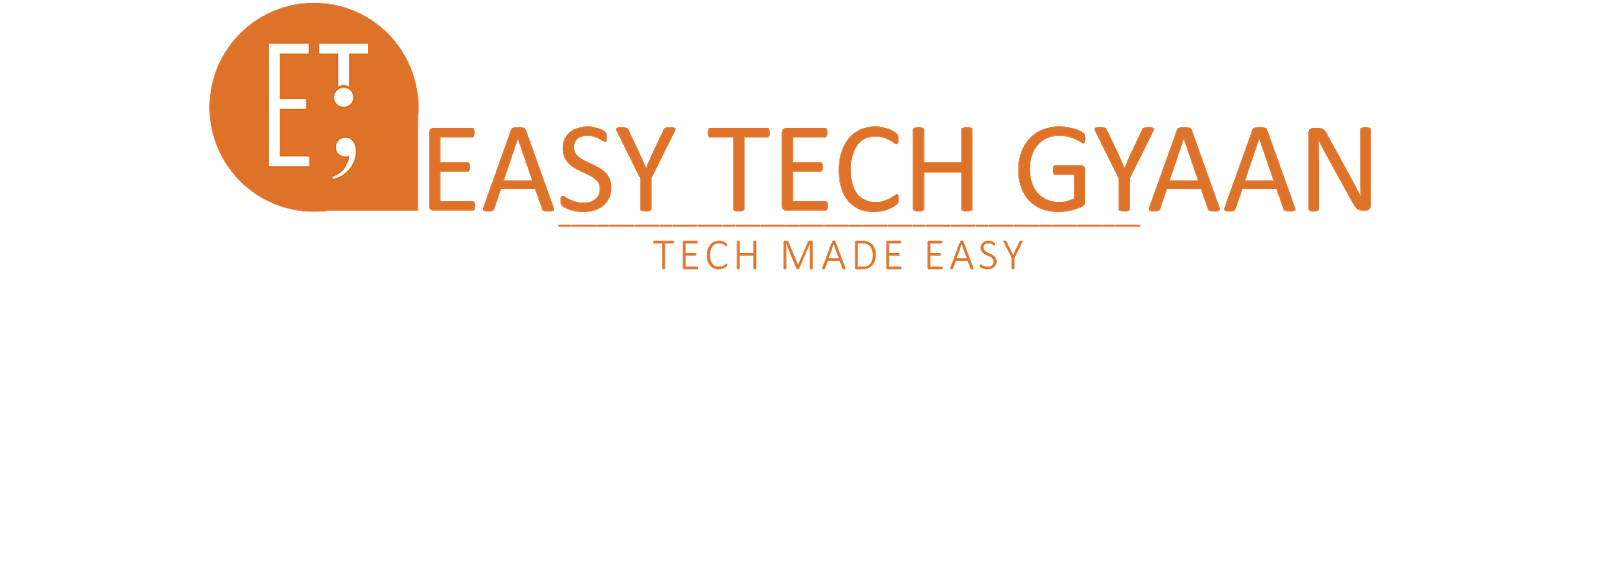 Easy Tech Gyaan : "Latest and Emerging Tech-Knowledge"